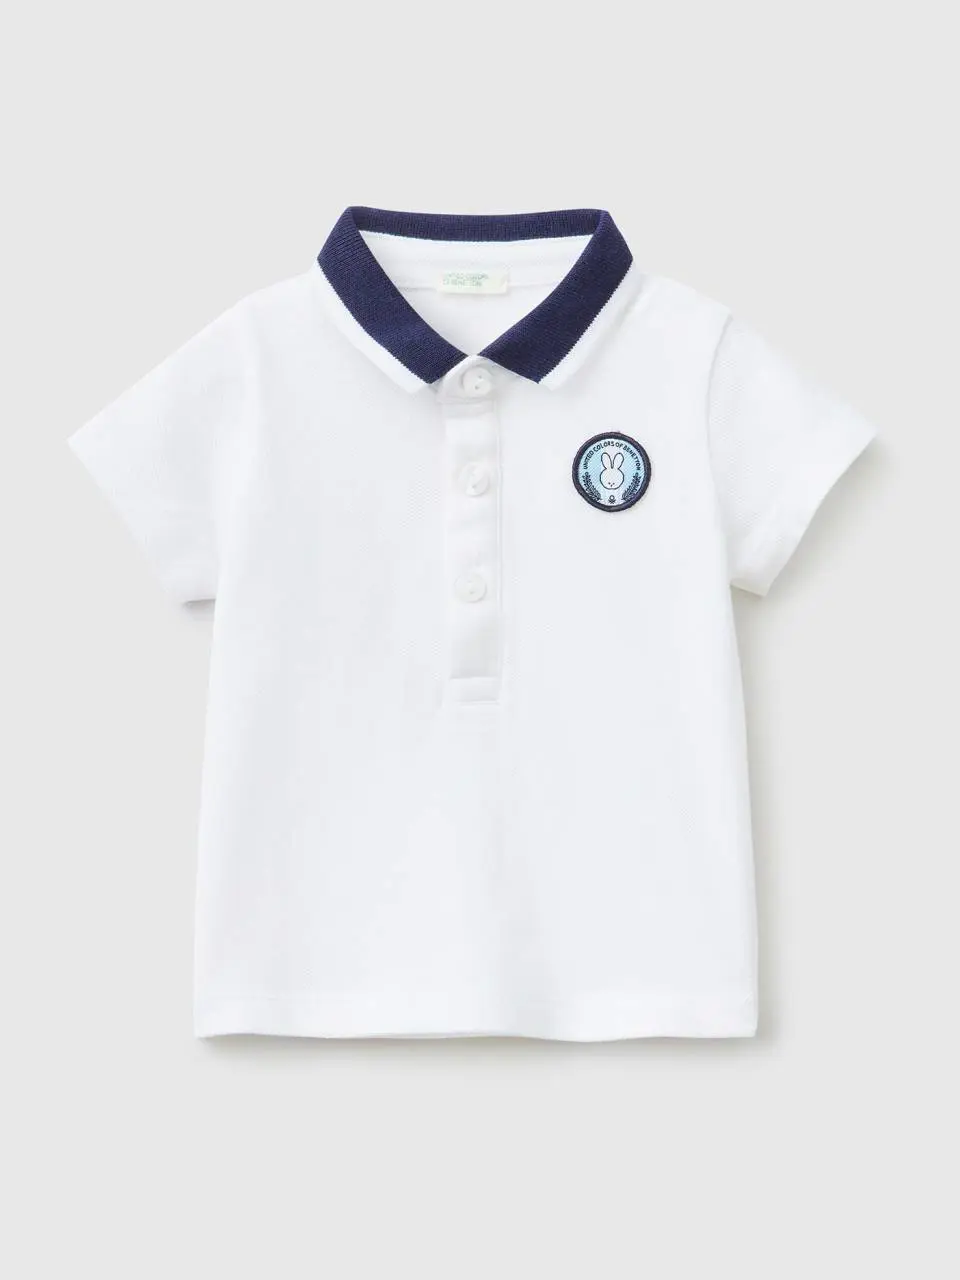 Benetton short sleeve polo with patch. 1